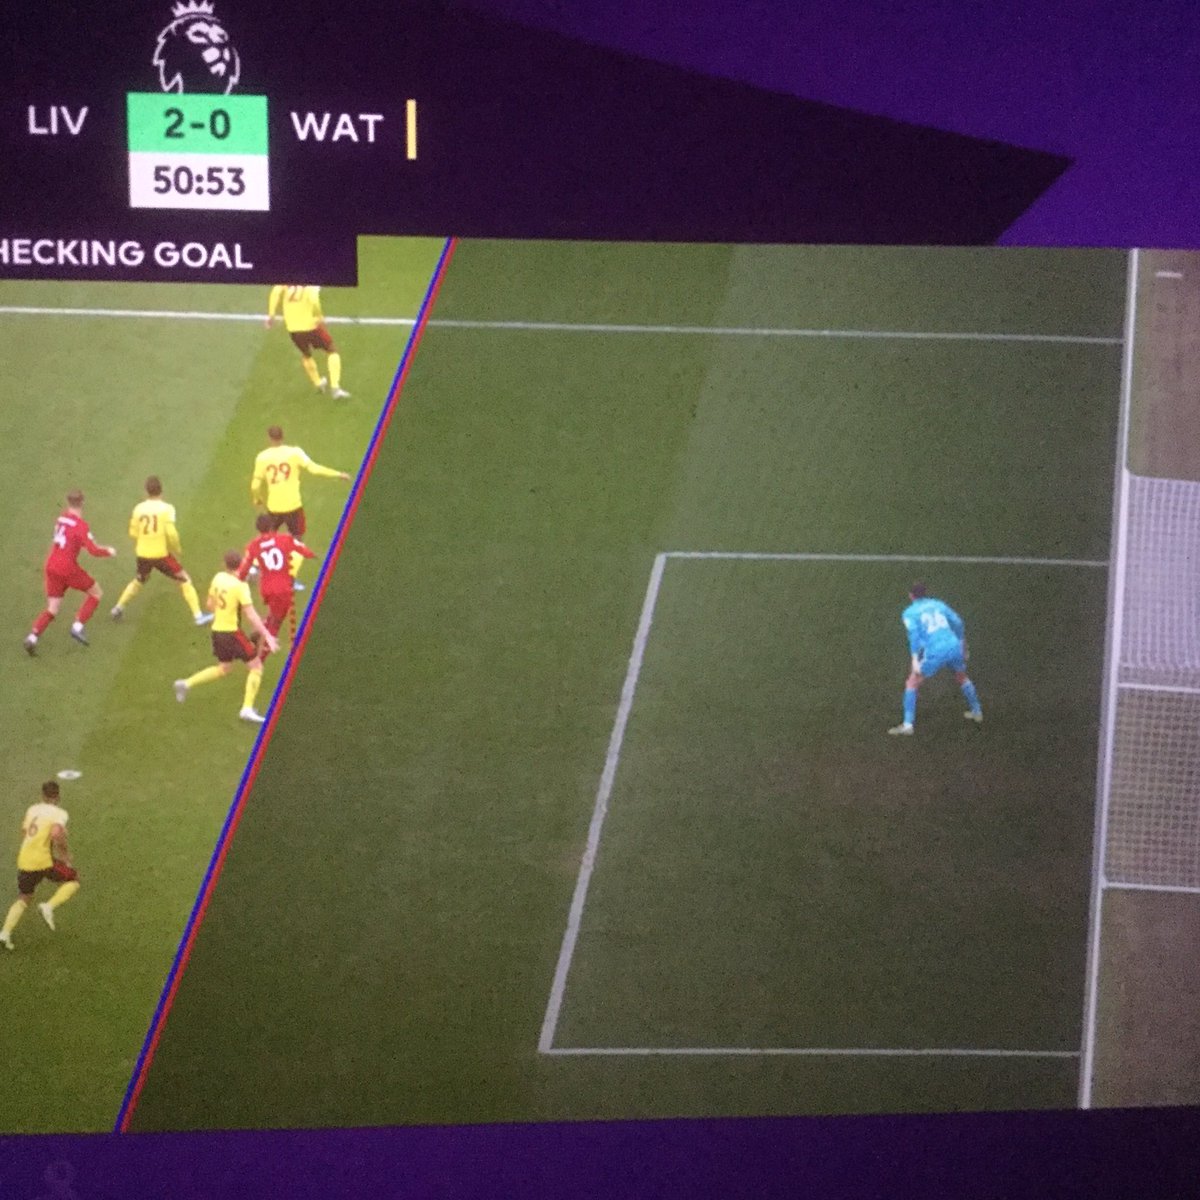 Watford (H) 2-0Fortunate again that this didn’t cost us. Looks like Liverpool is the only team in world football where offsides are given by players arms instead of the parts of the body they’re actually allowed to score with